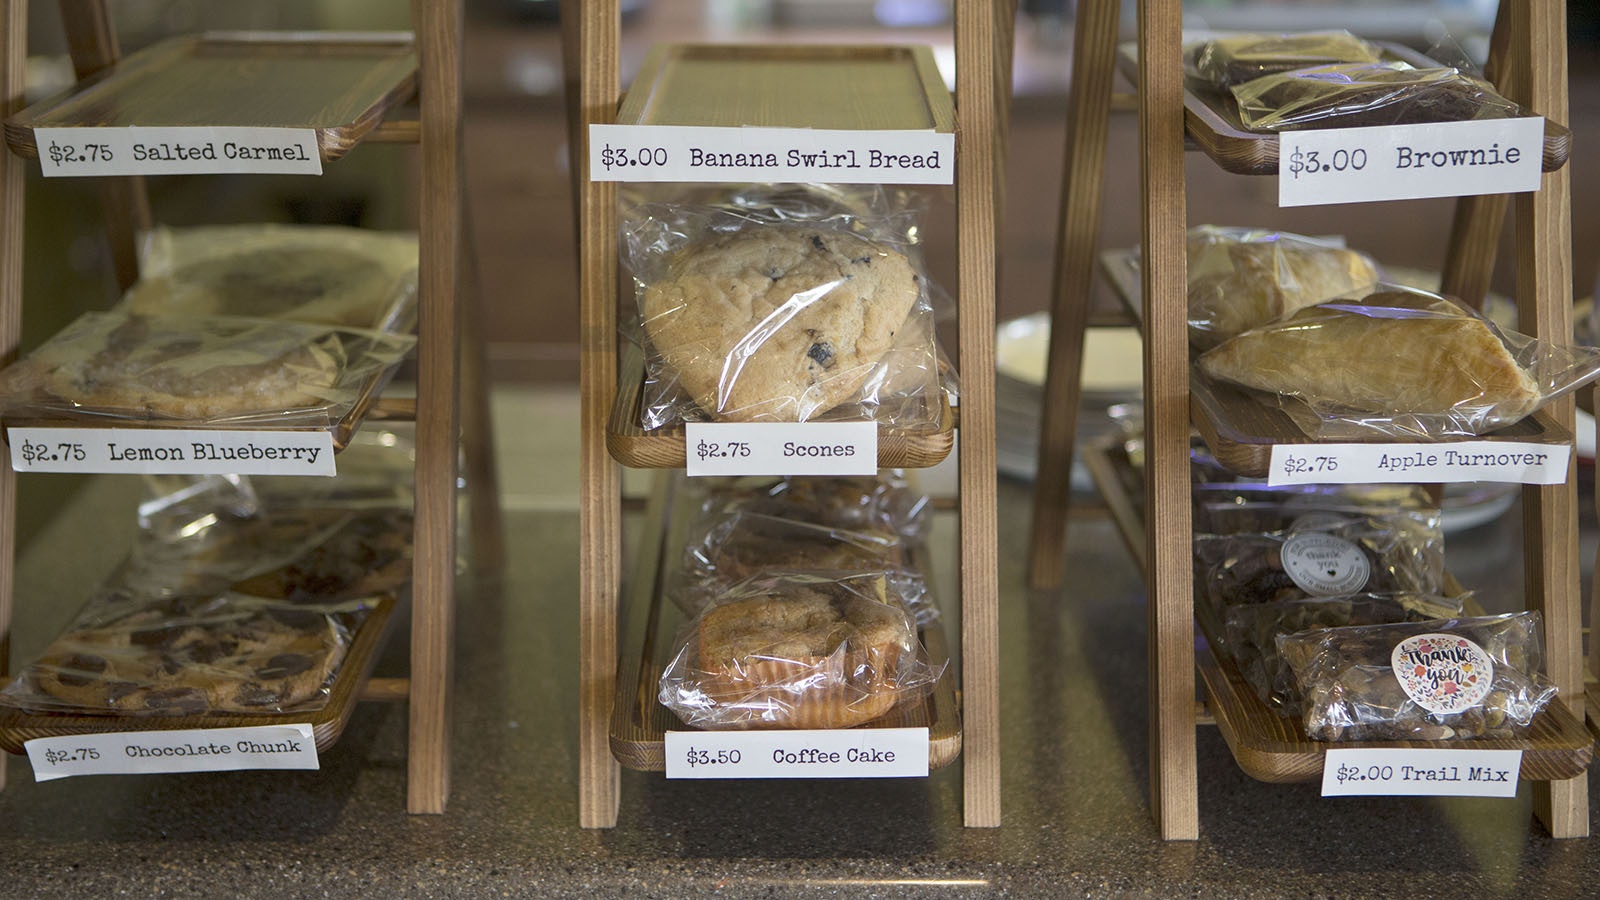 Pardners Cafe offers a variety of baked goods including cookies, scores, breads and brownies.